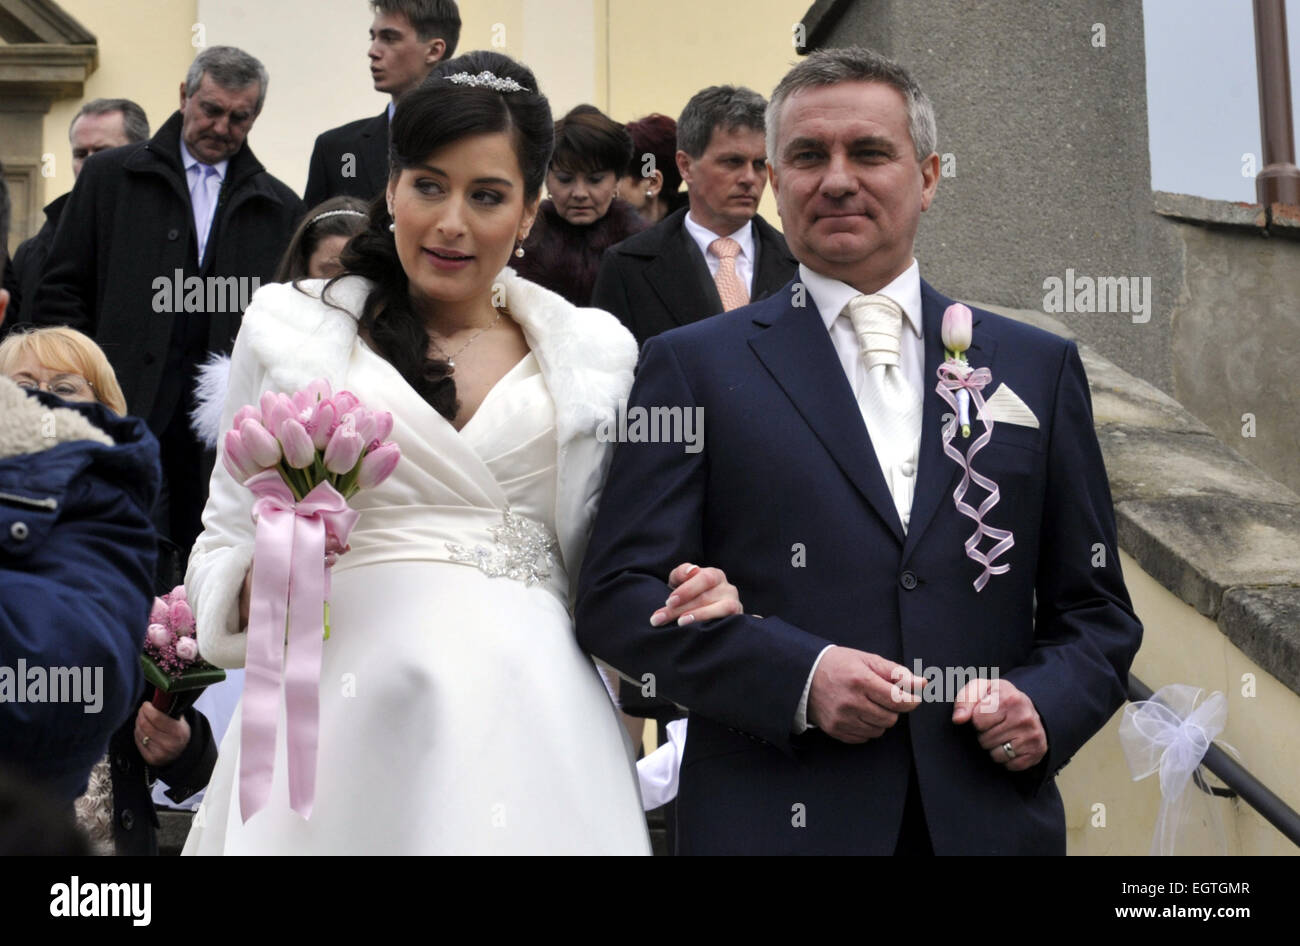 Head of the Presidential Office Vratislav Mynar, 47, married Czech Television (CT) presenter Alexandra Noskova, aged 31, with President Milos Zeman serving as the best man at the ceremony today, on Saturday, February 28, 2015. Mynar is a businessman from Osvetimany, where he is also a member of the local town hall. The marriage was held in a church. Most guests to it, including Zeman, came together in a coach. All of them, including Zeman, were greeted by a glass of plum brandy. In the summer, a boy will be born to the newly-wed couple. Due to her romance with Mynar, Noskova had to leave her j Stock Photo